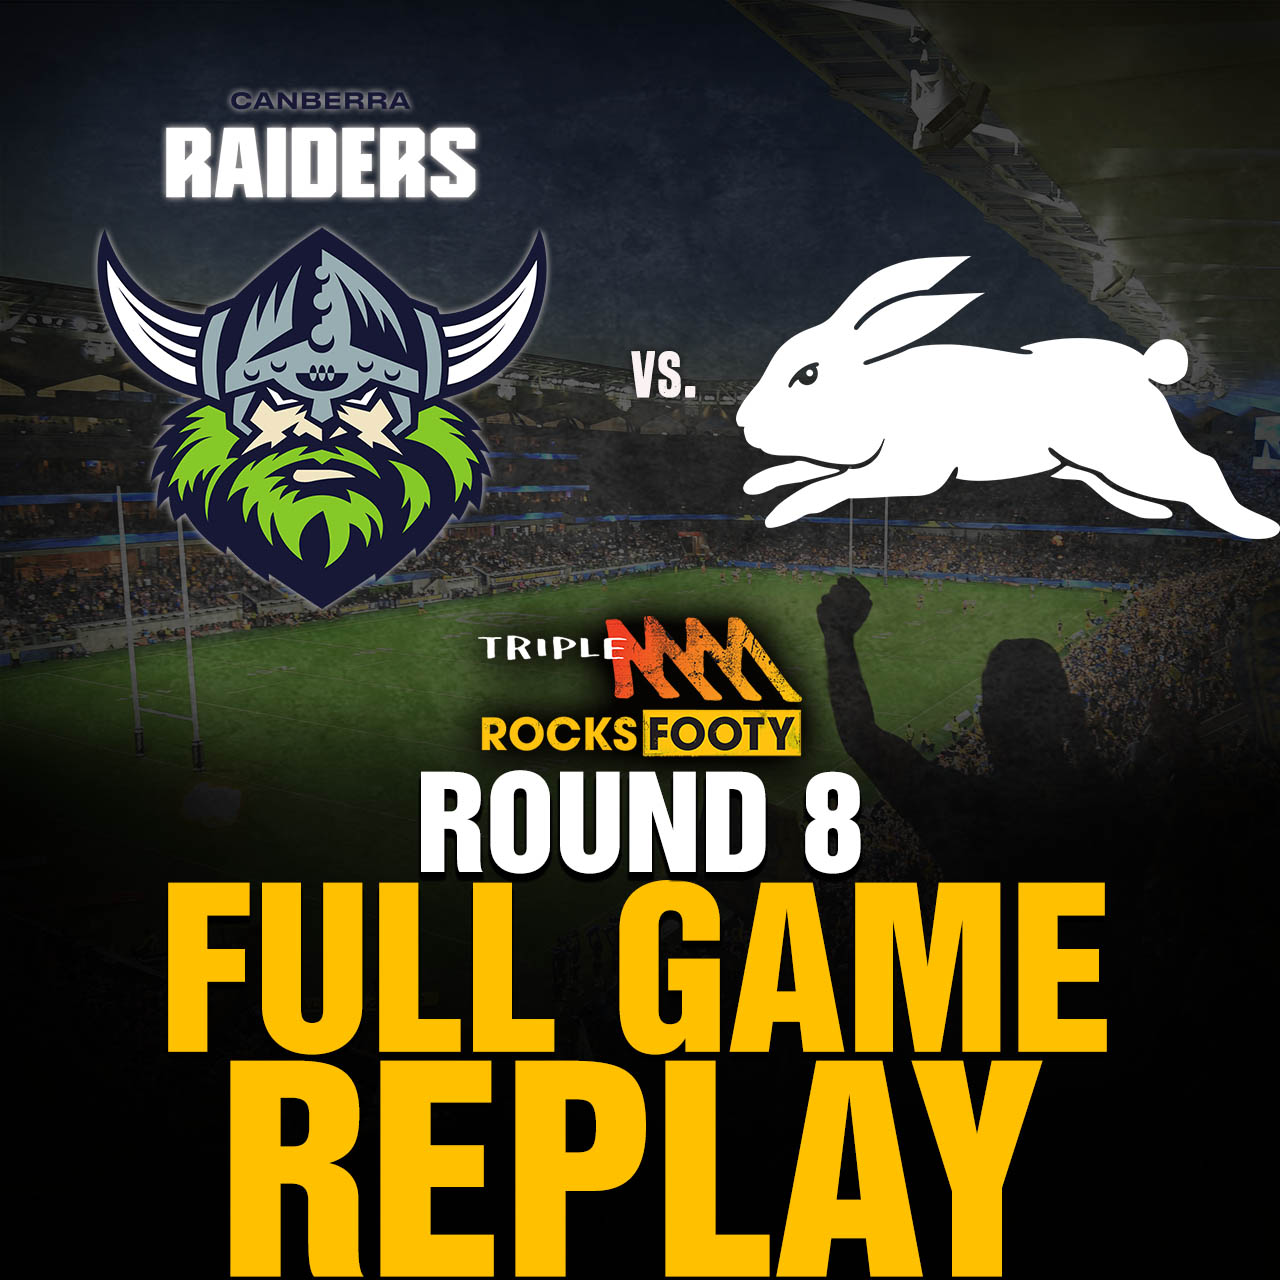 FULL GAME REPLAY | Canberra Raiders vs. South Sydney Rabbitohs